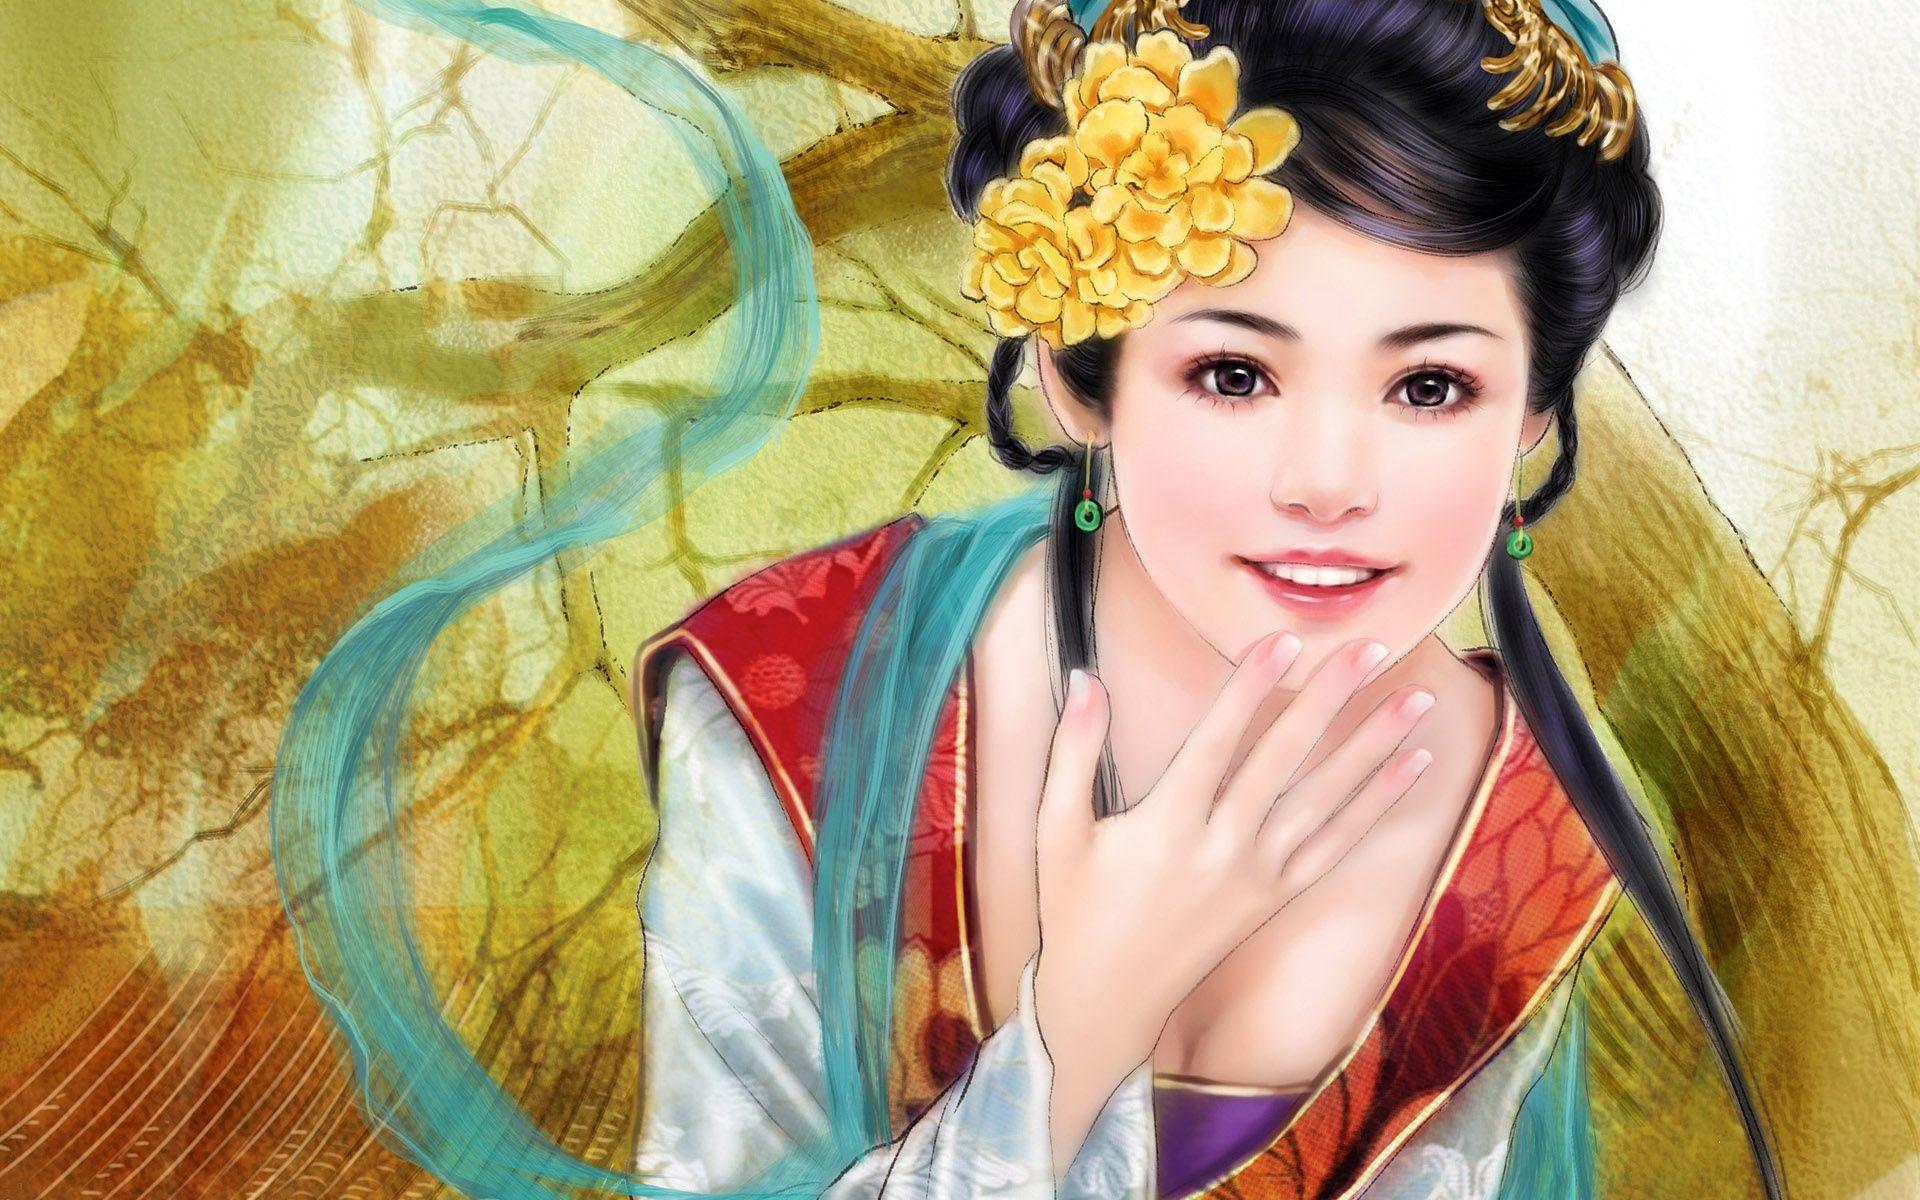 Gorgeous Japanese girl painting. Painting of girl, Beautiful girl